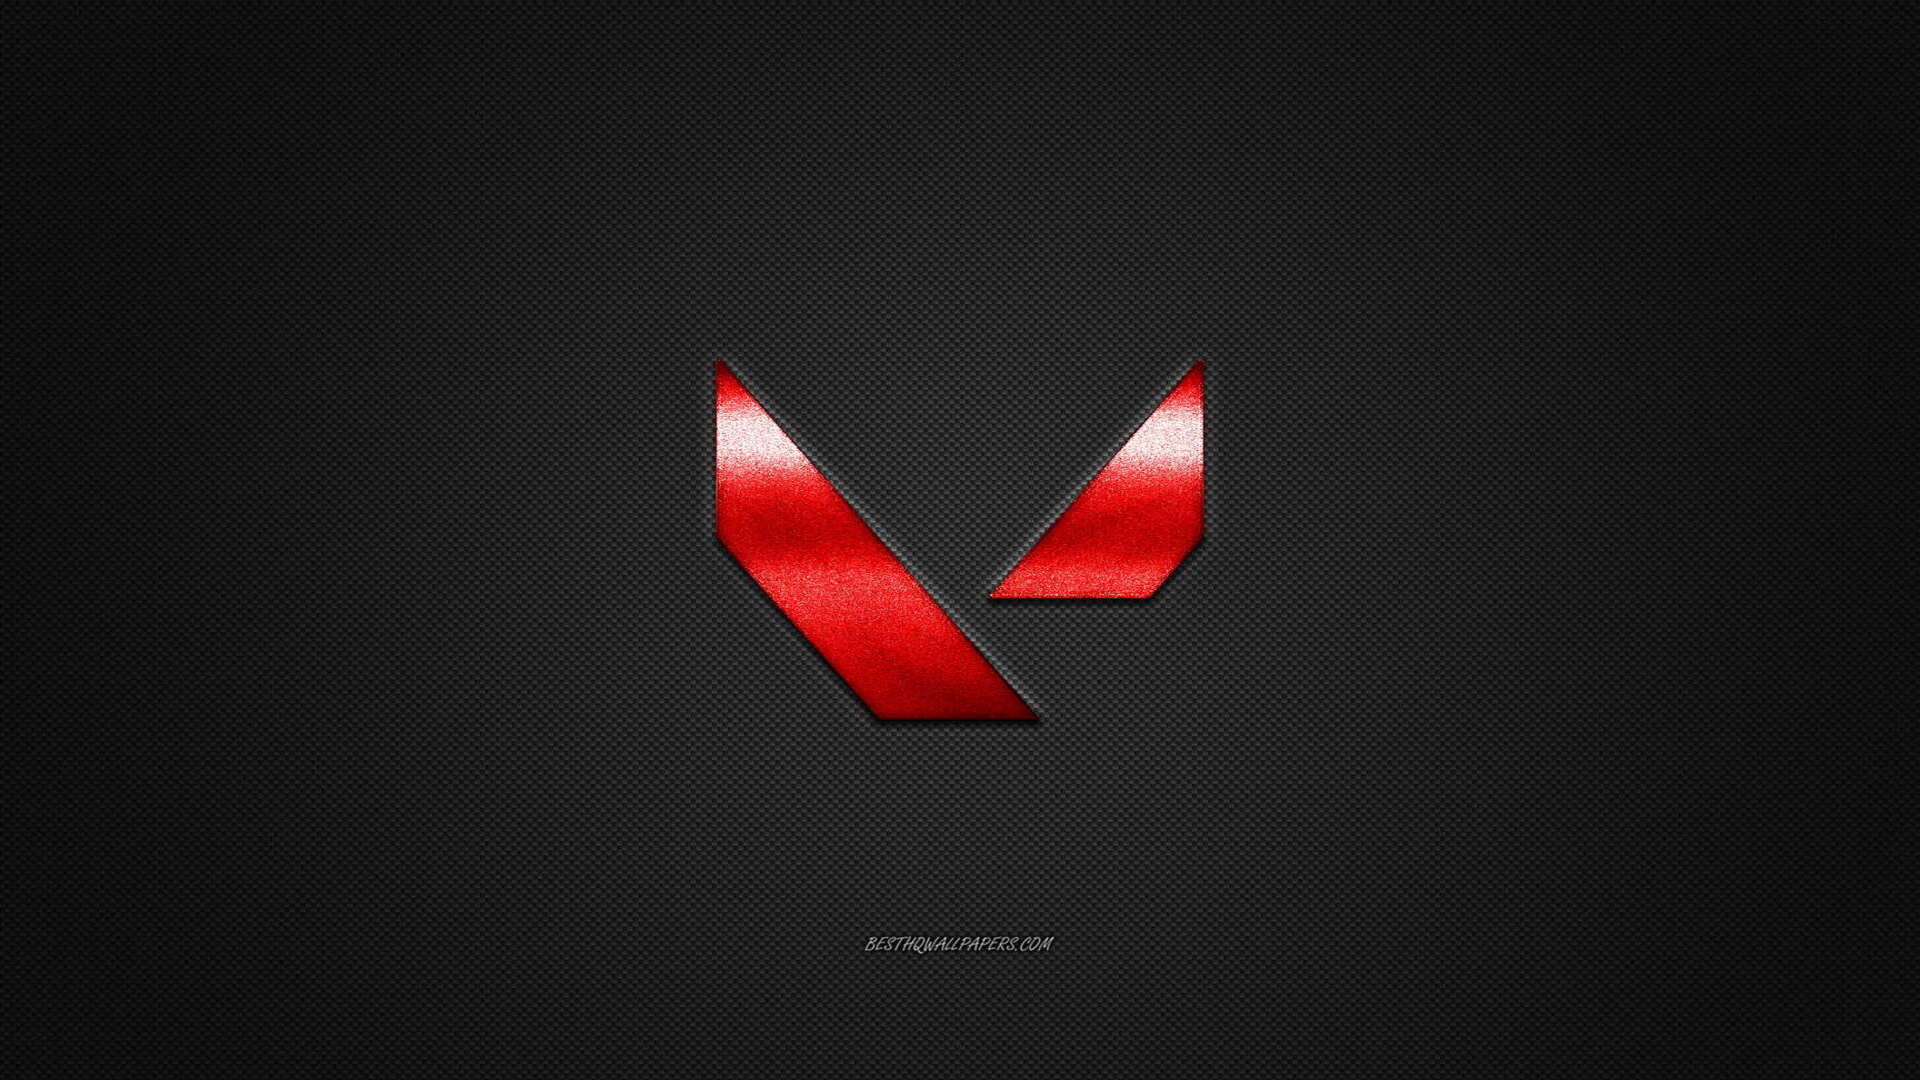 Image by N/A – The Valorant logo over a carbon fiber background.